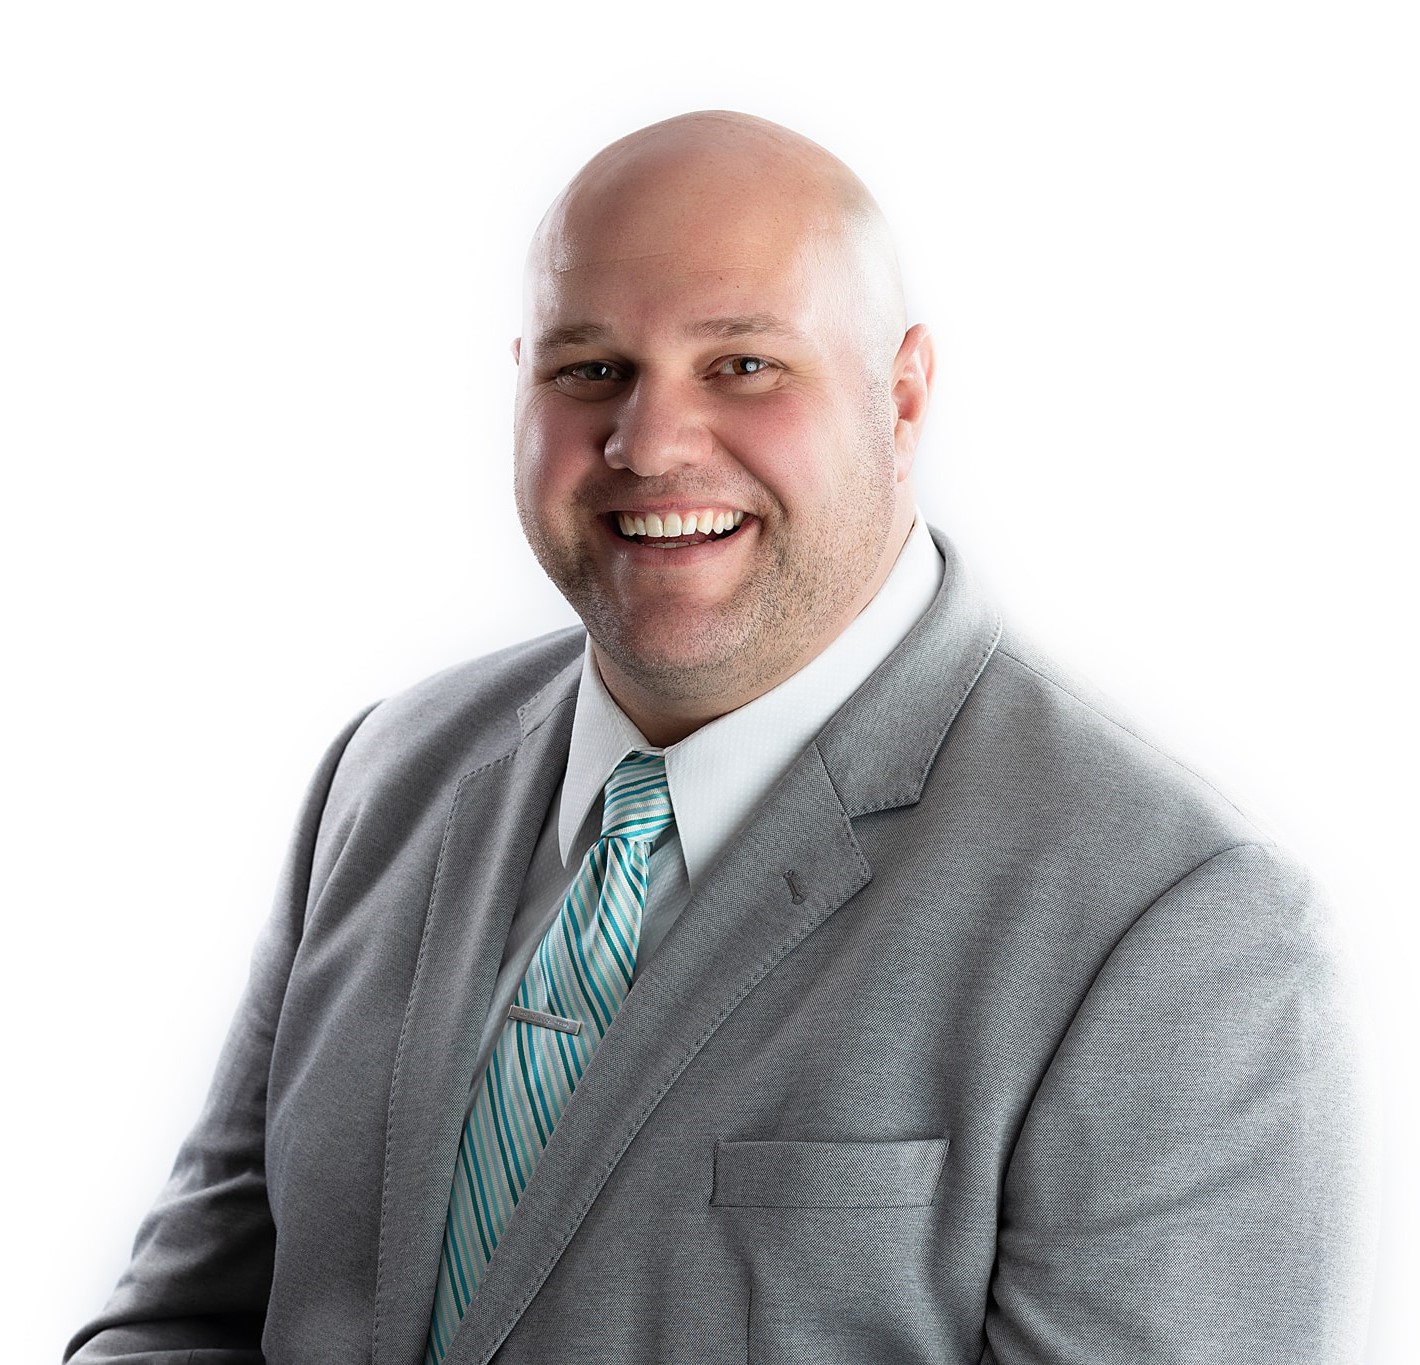 Jordan Lawhead, Vice President at Blue Signal, smiling in a professional headshot with a grey suit and teal striped tie.